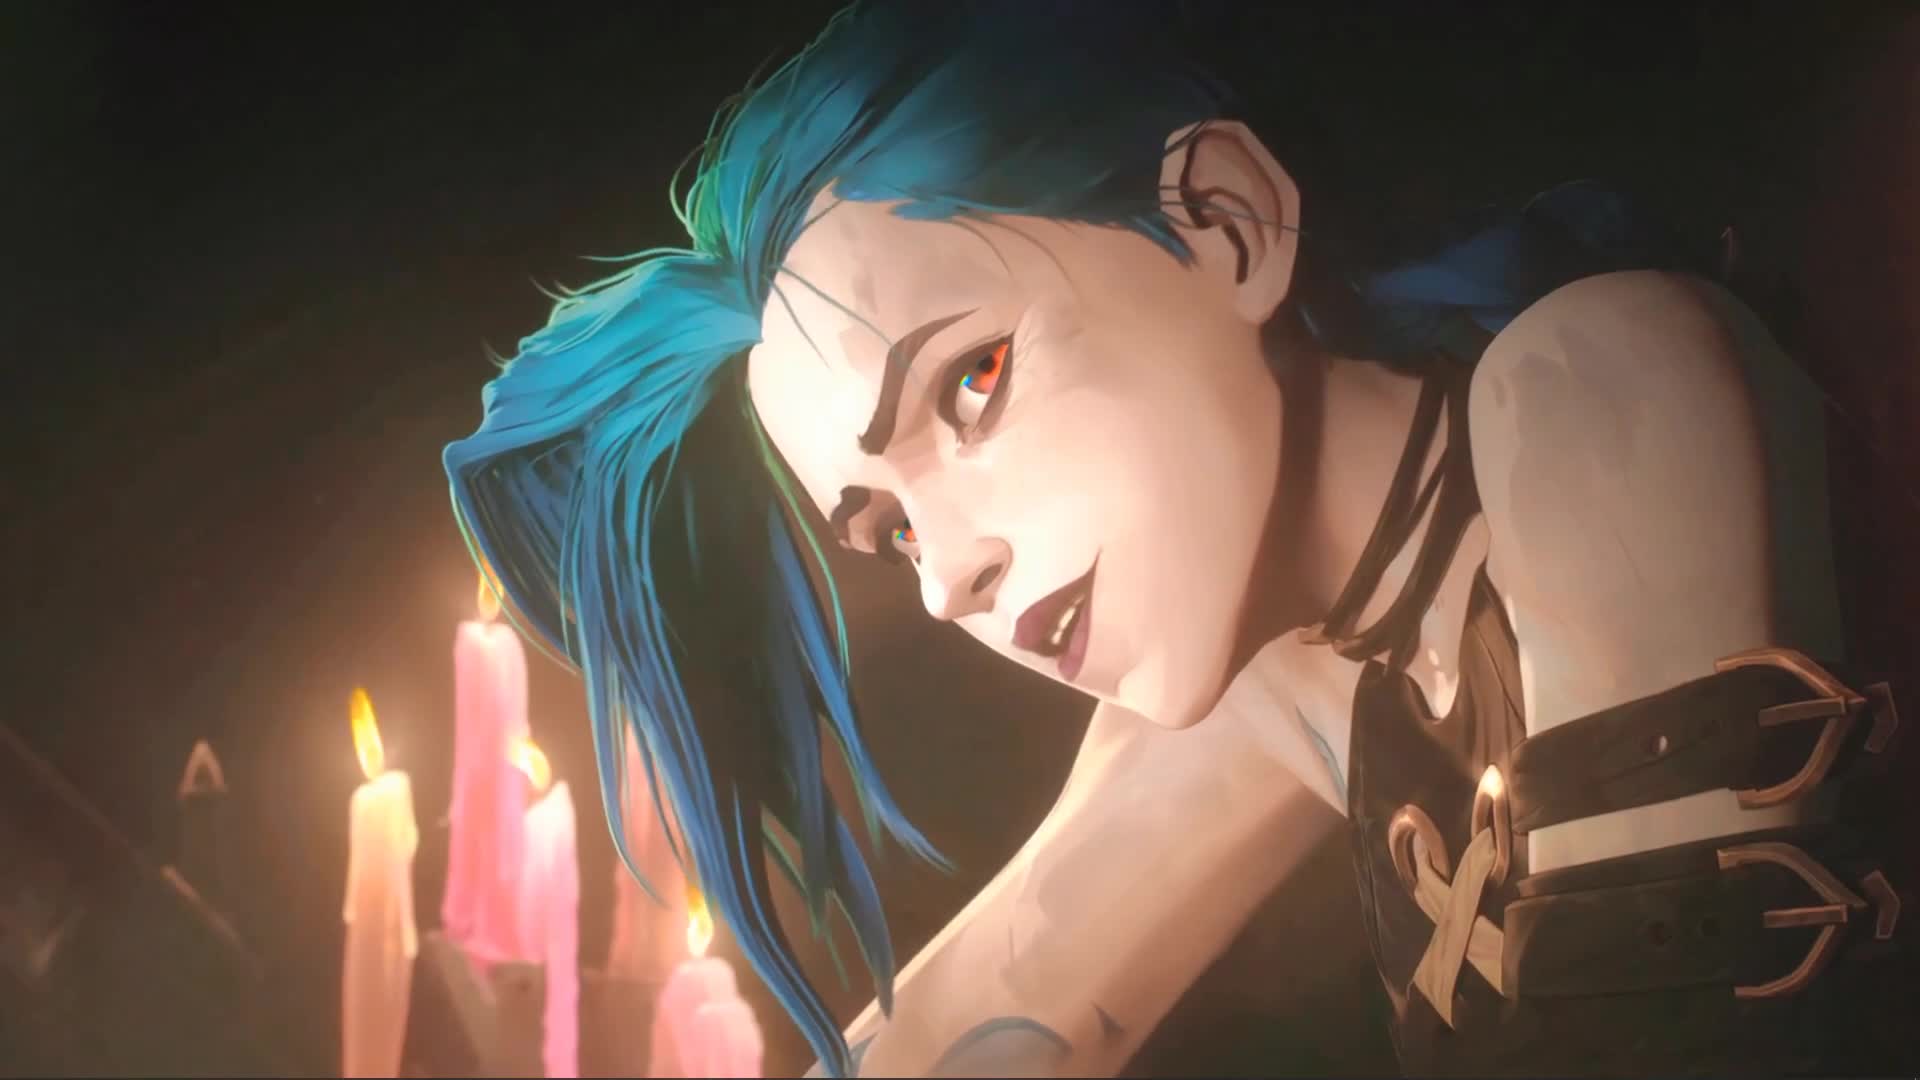 Jinx From Arcane League Of Legends Live Wallpaper: Free HD 4K Live Wallpaper For Windows & MacOS